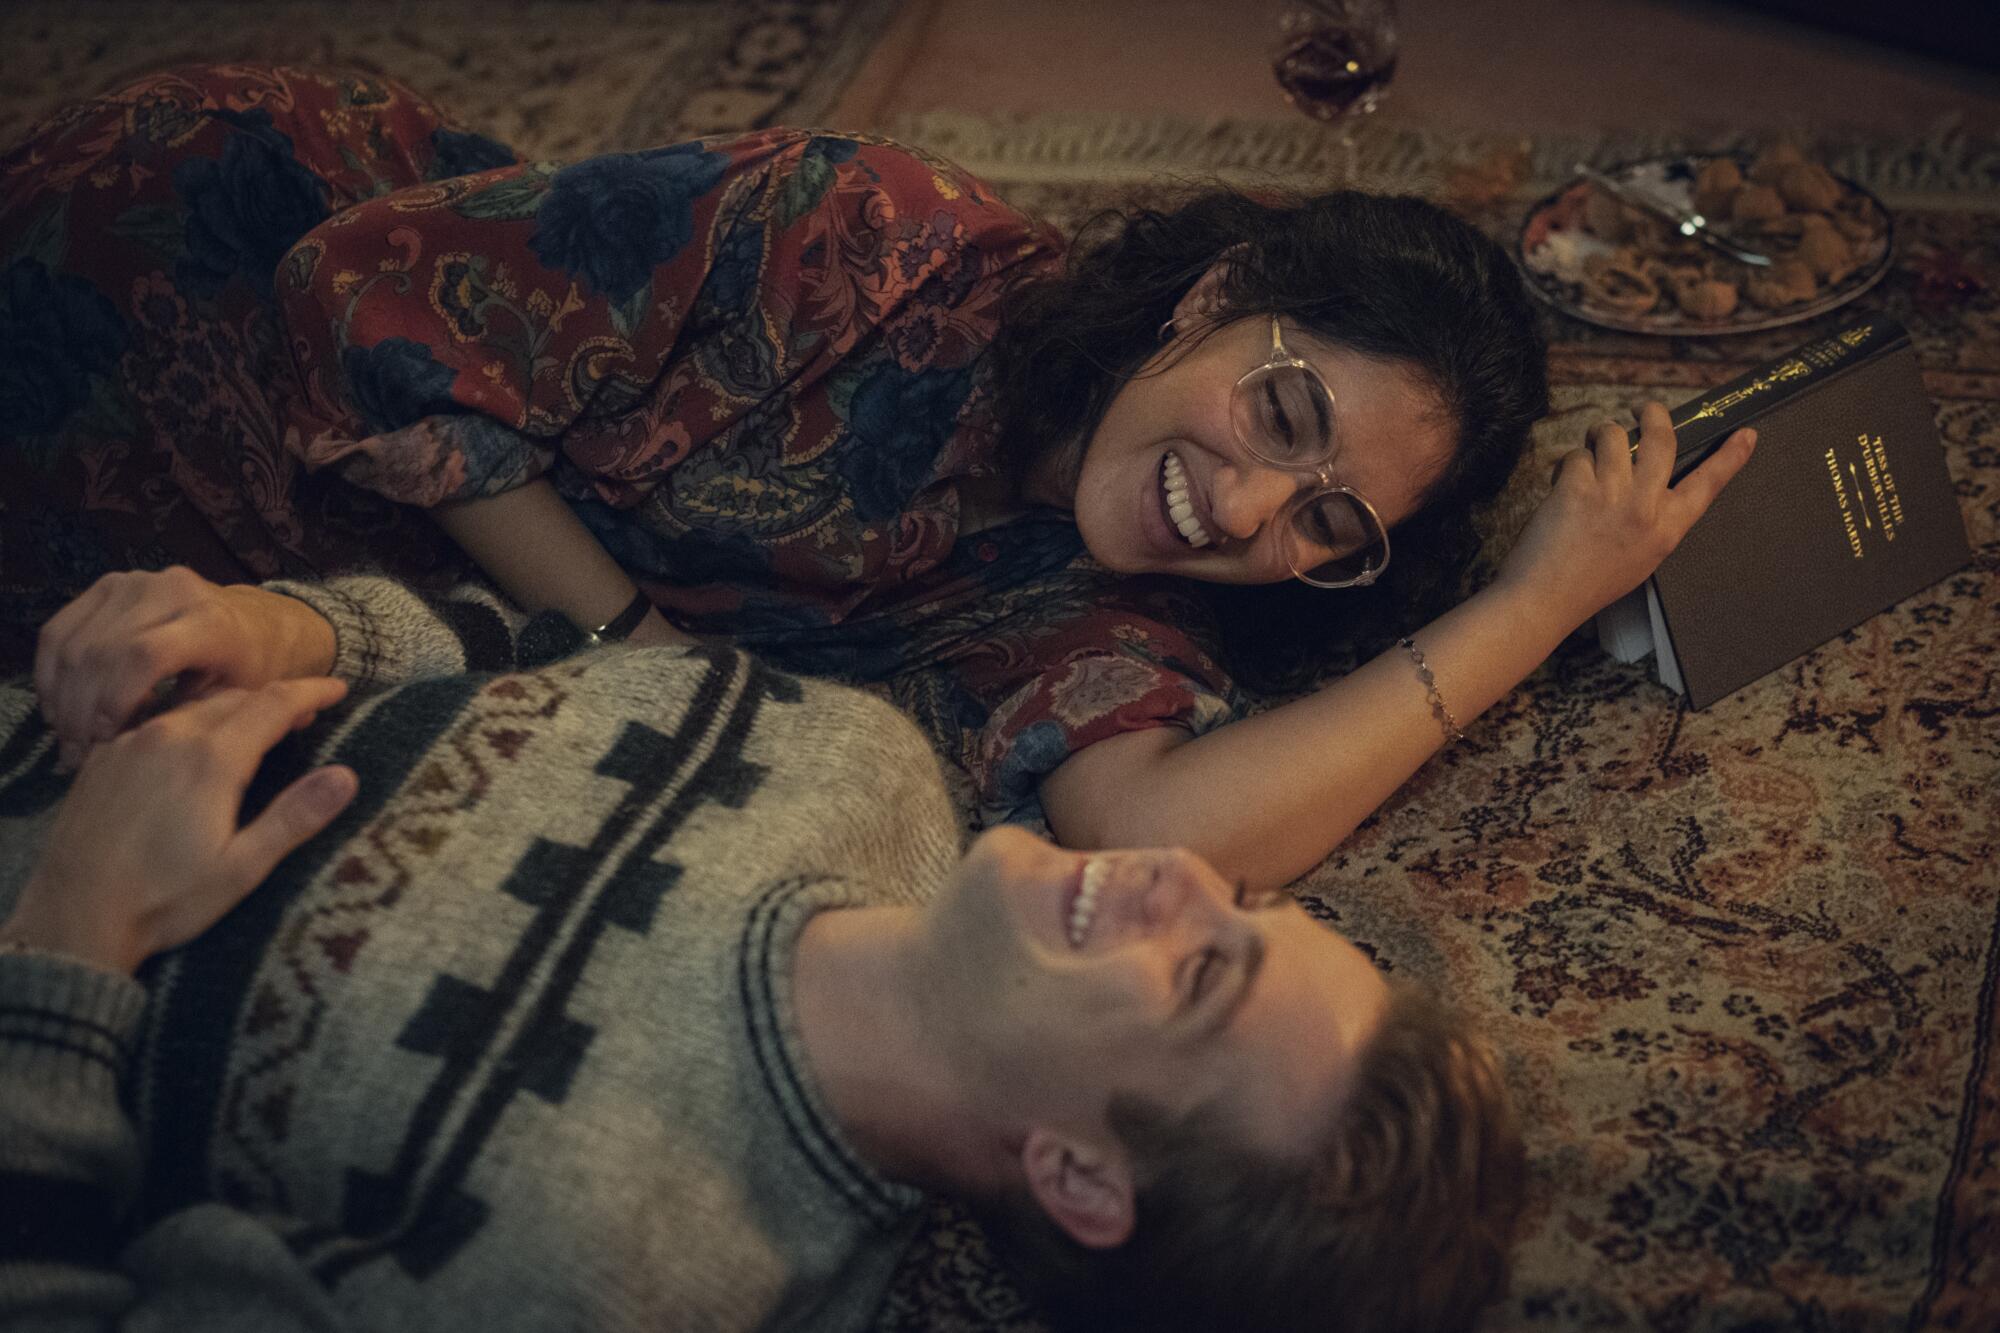 A couple laying on the carpet laughing